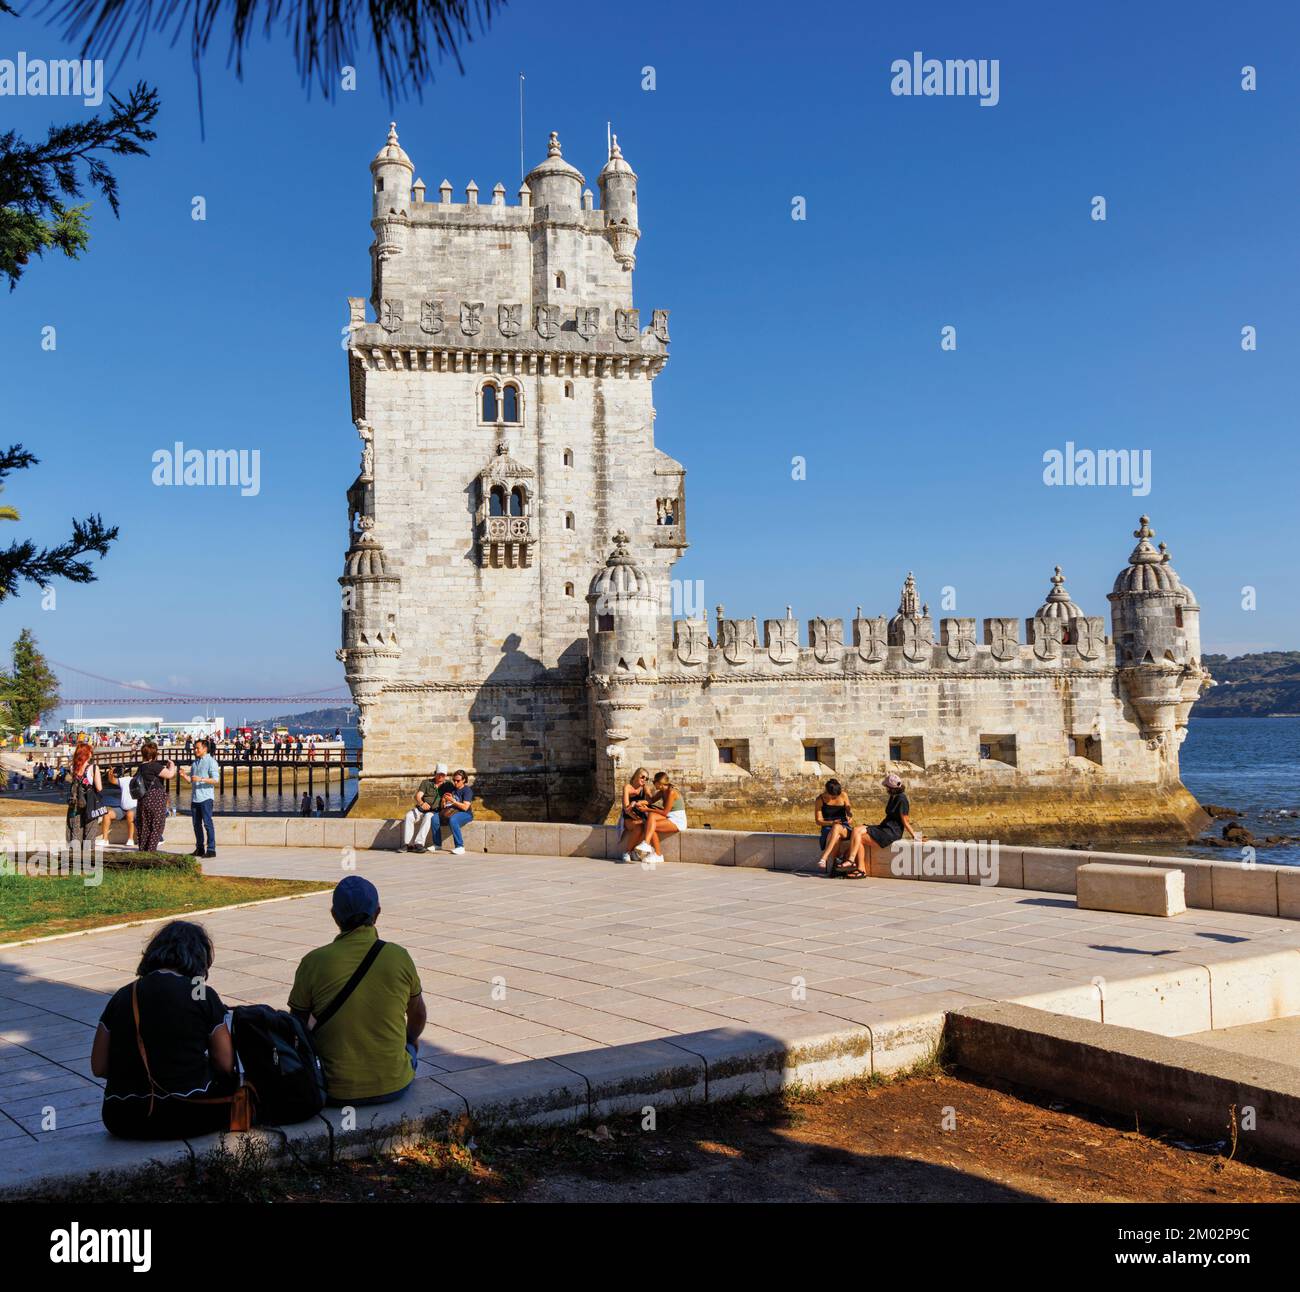 Lisbon, Portugal.  The 16th century Torre de Belem or Tower of Belem. The tower is an important example of Manueline architecture and a UNESCO World H Stock Photo